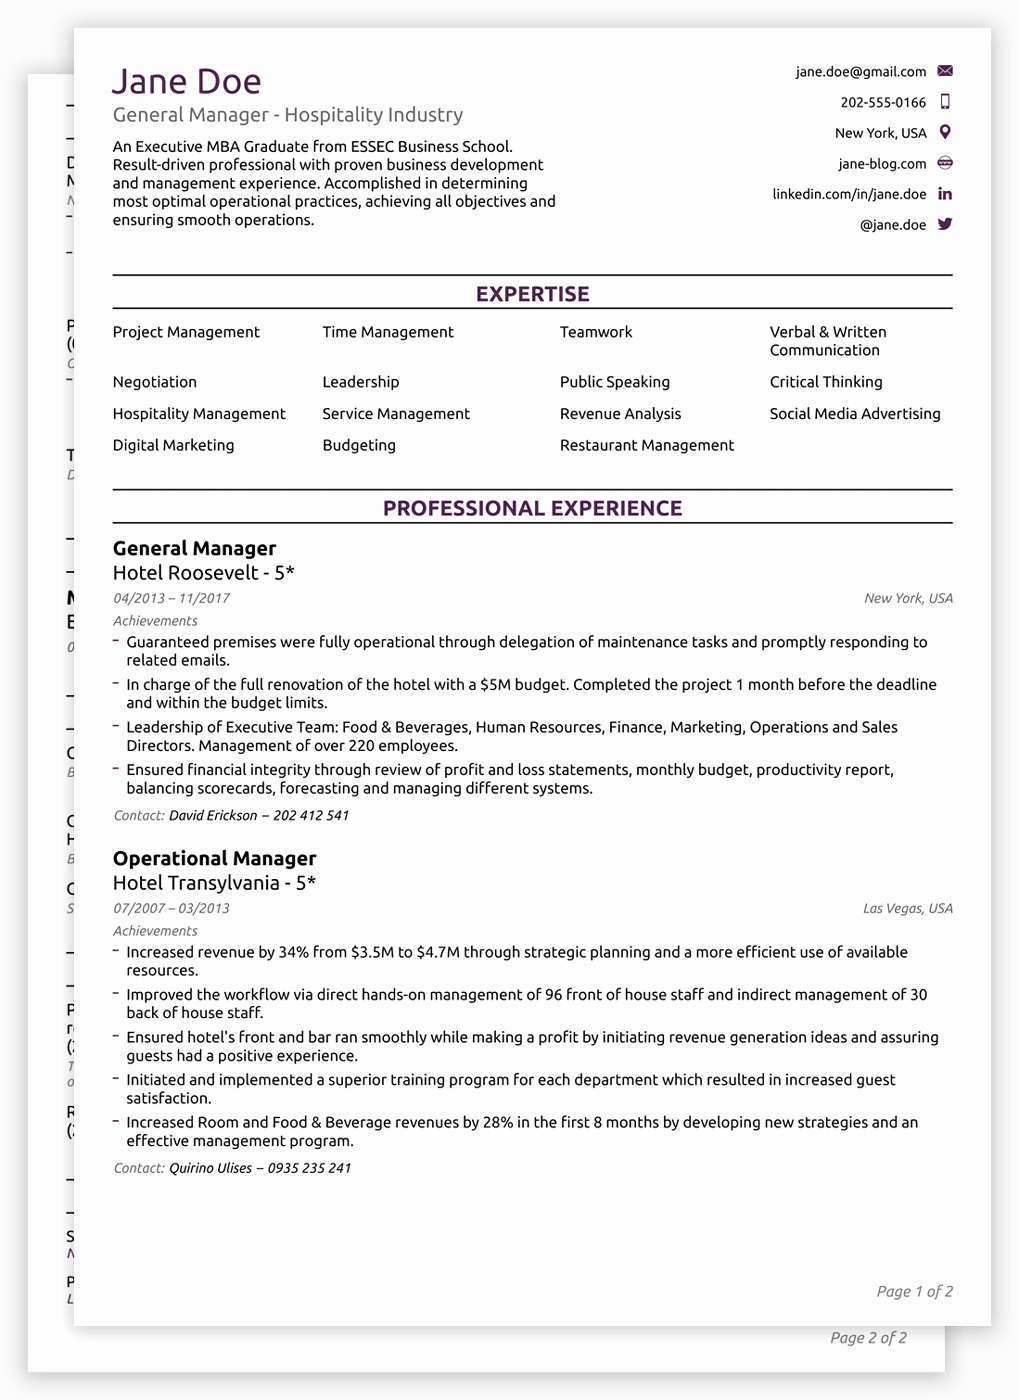 Resume Template with Photo New Cv Reportier